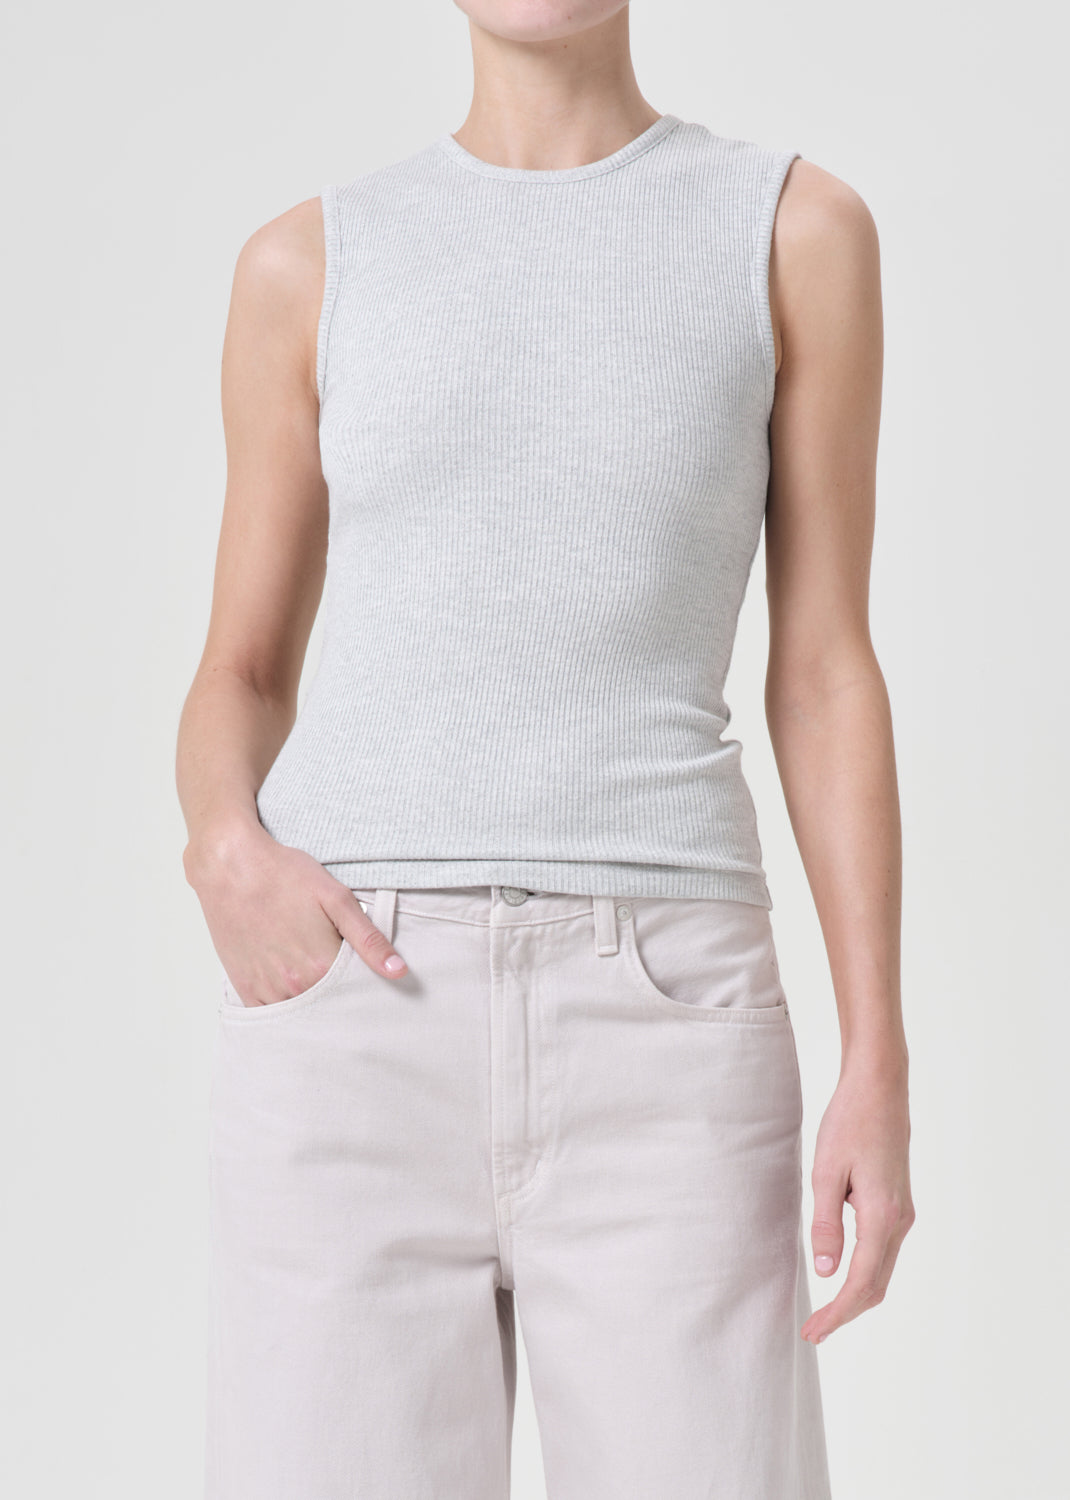 Binx Tank in Brushed Grey Heather front